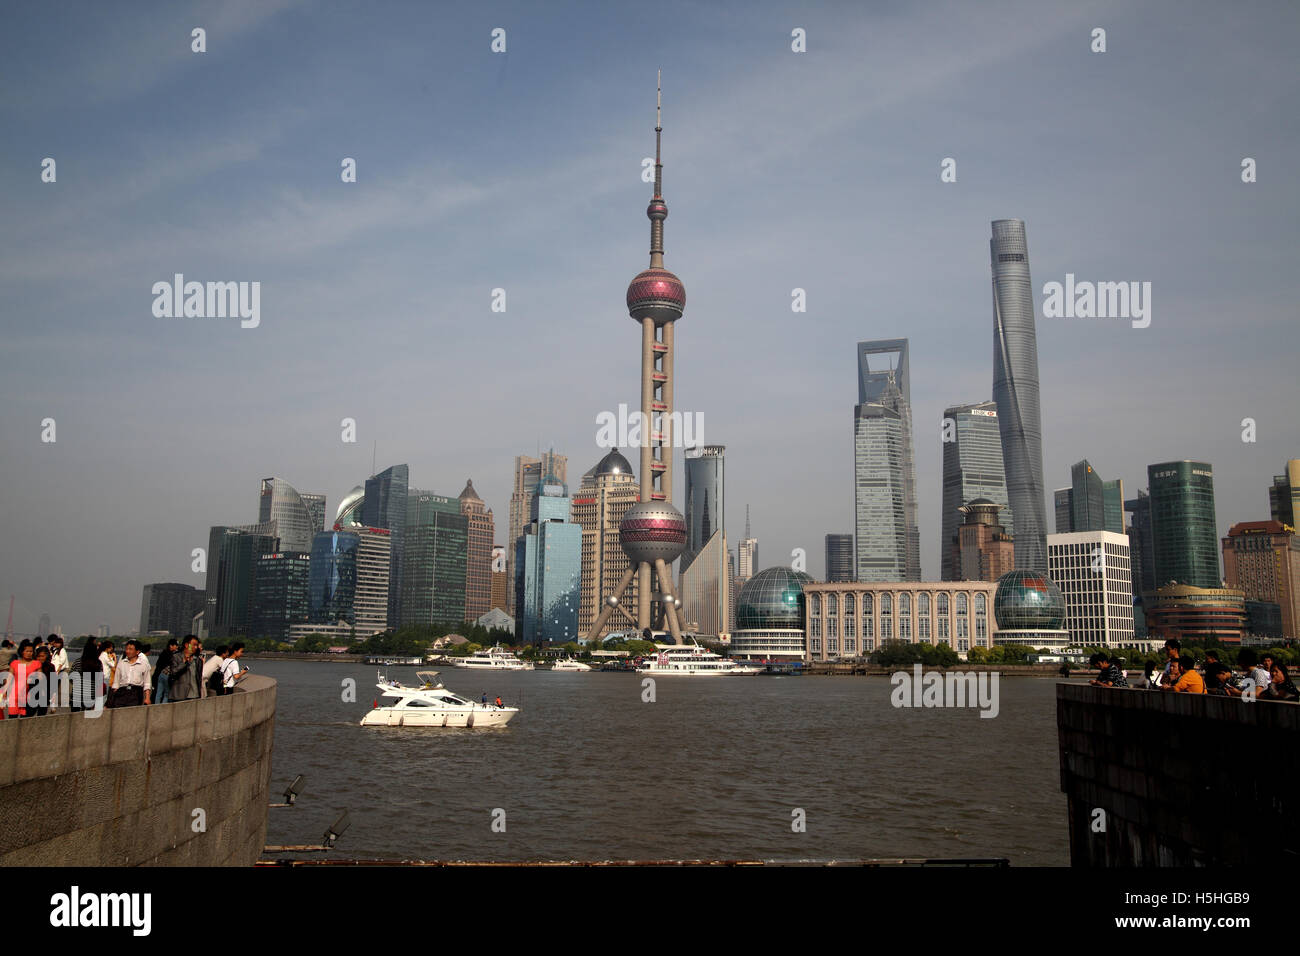 Tourists stand on the Bund Promenade, look at Pudong, the Financial district also called Lujiazui skyline and the Huangpu River. Stock Photo